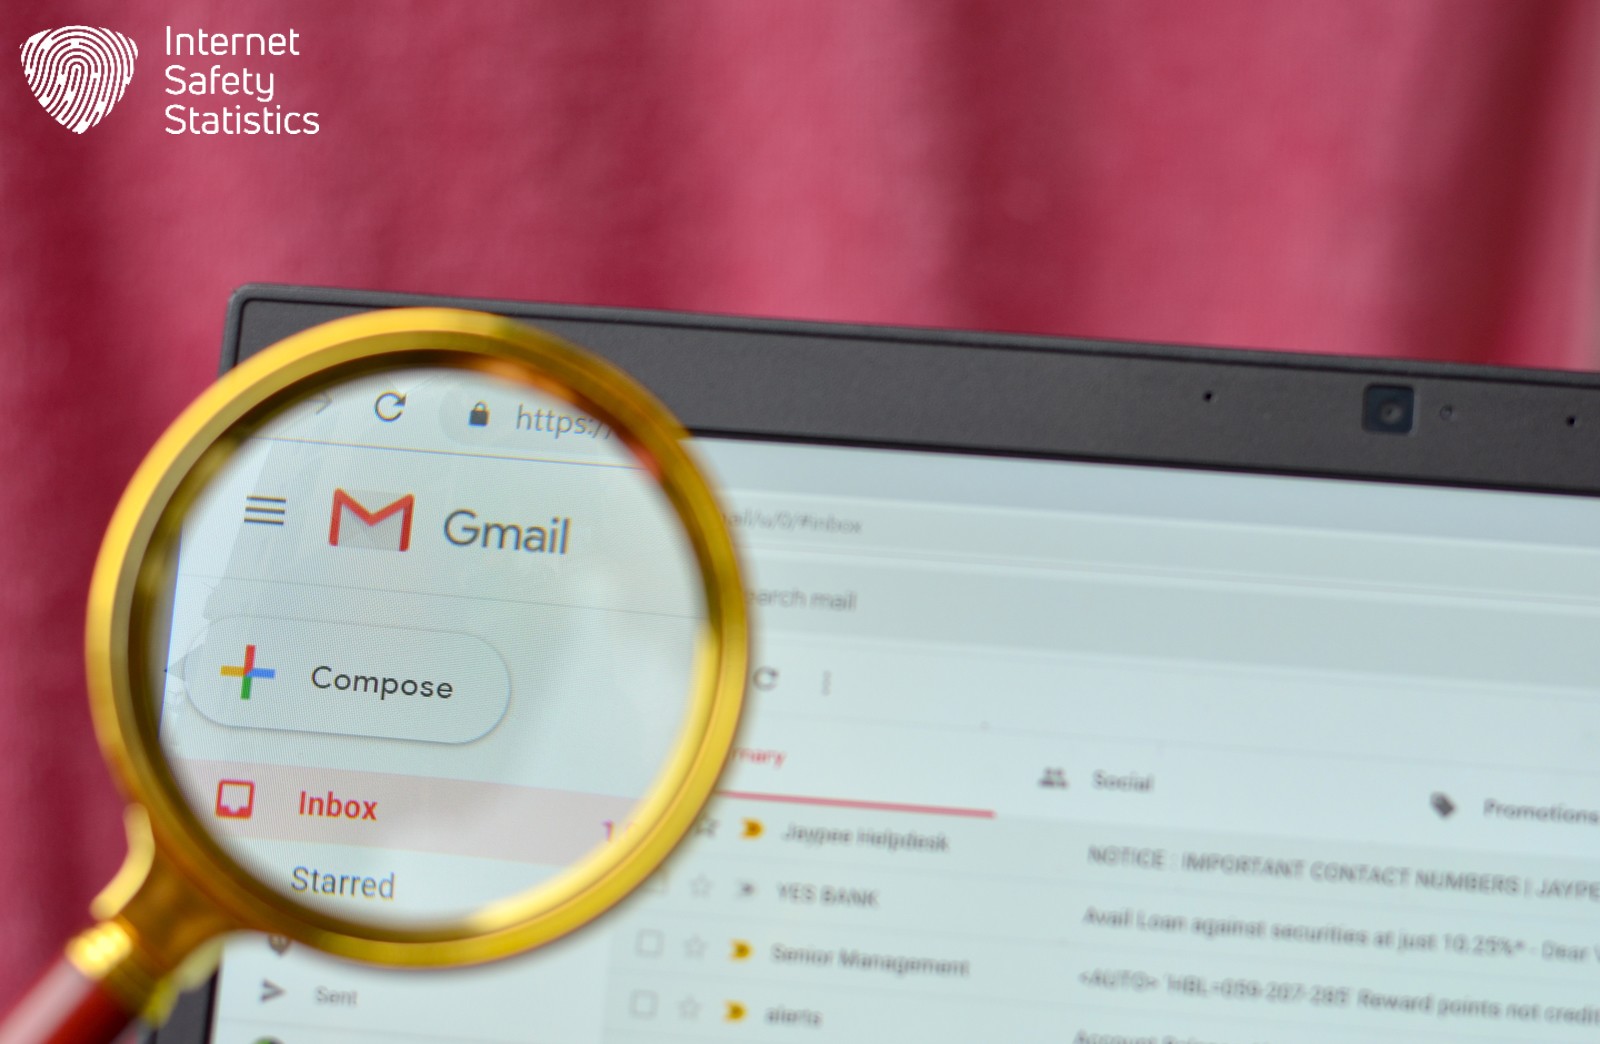 How to Encrypt Email in Yahoo Mail - Gmail uses TLS and S-MIME encryption